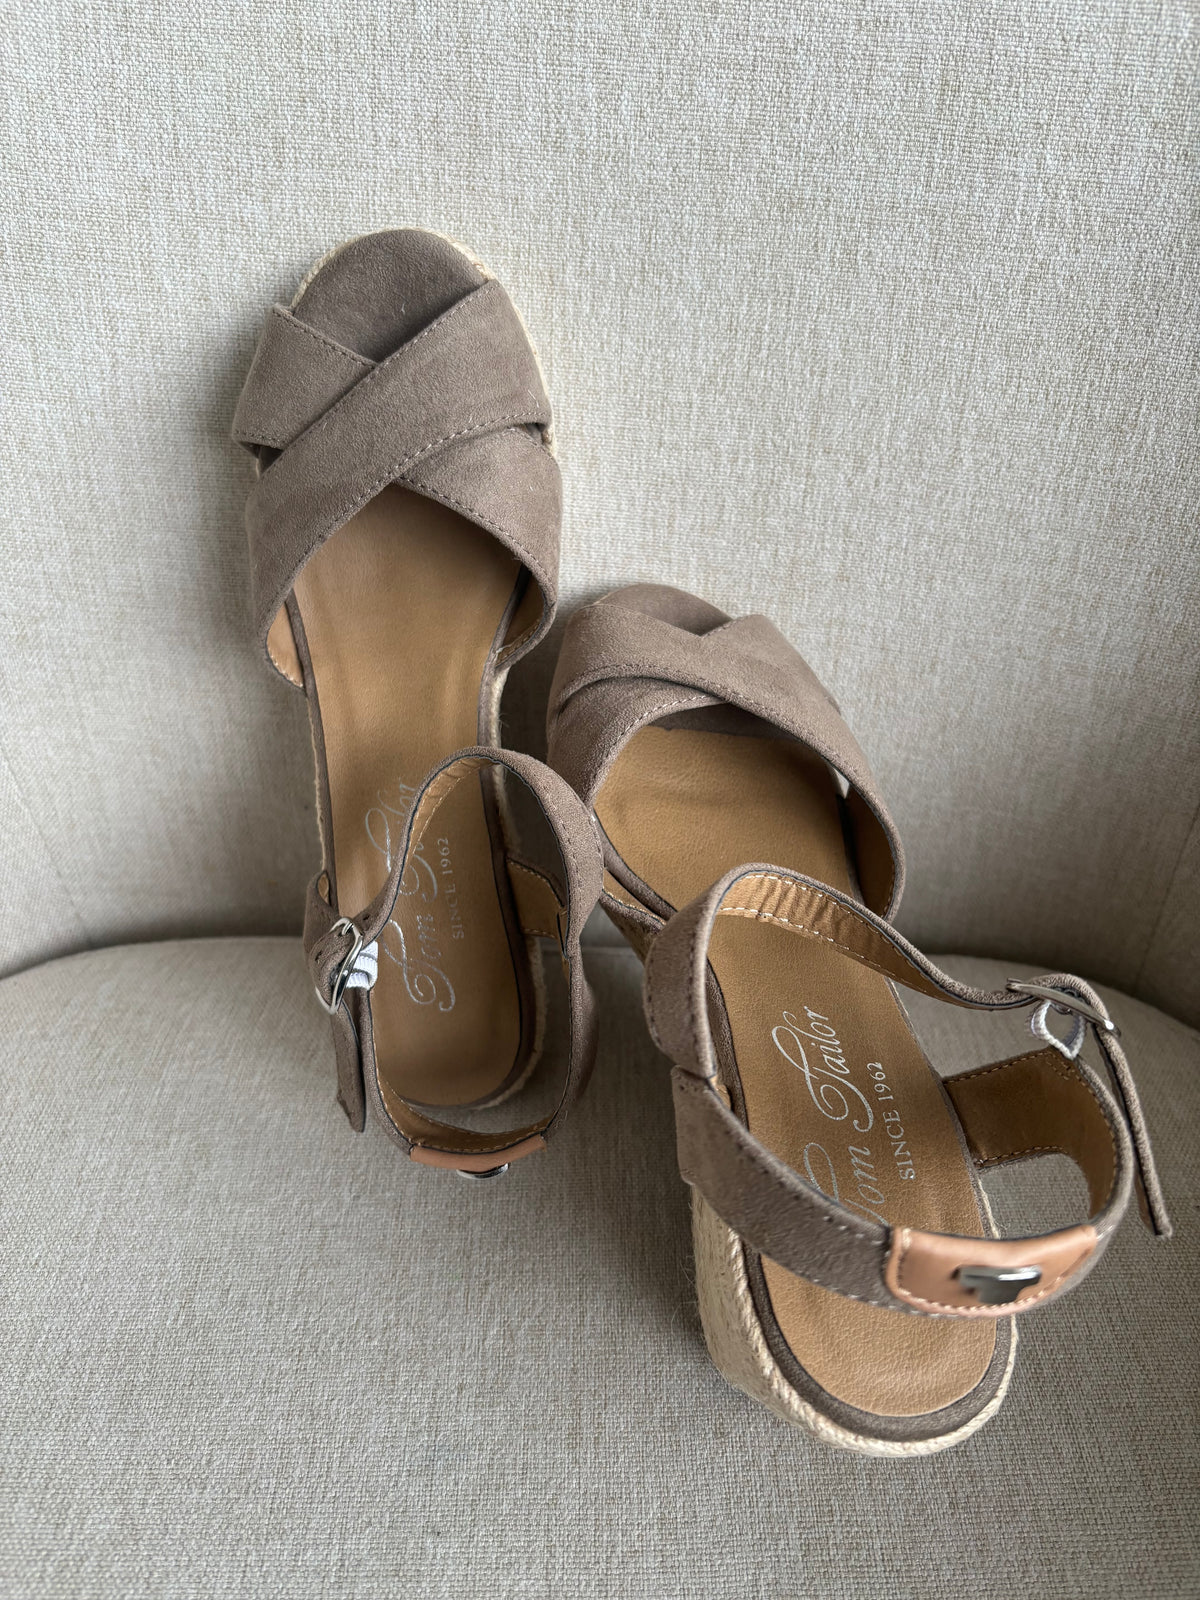 Beige Wedge Sandals by Tom Tailor Size 3